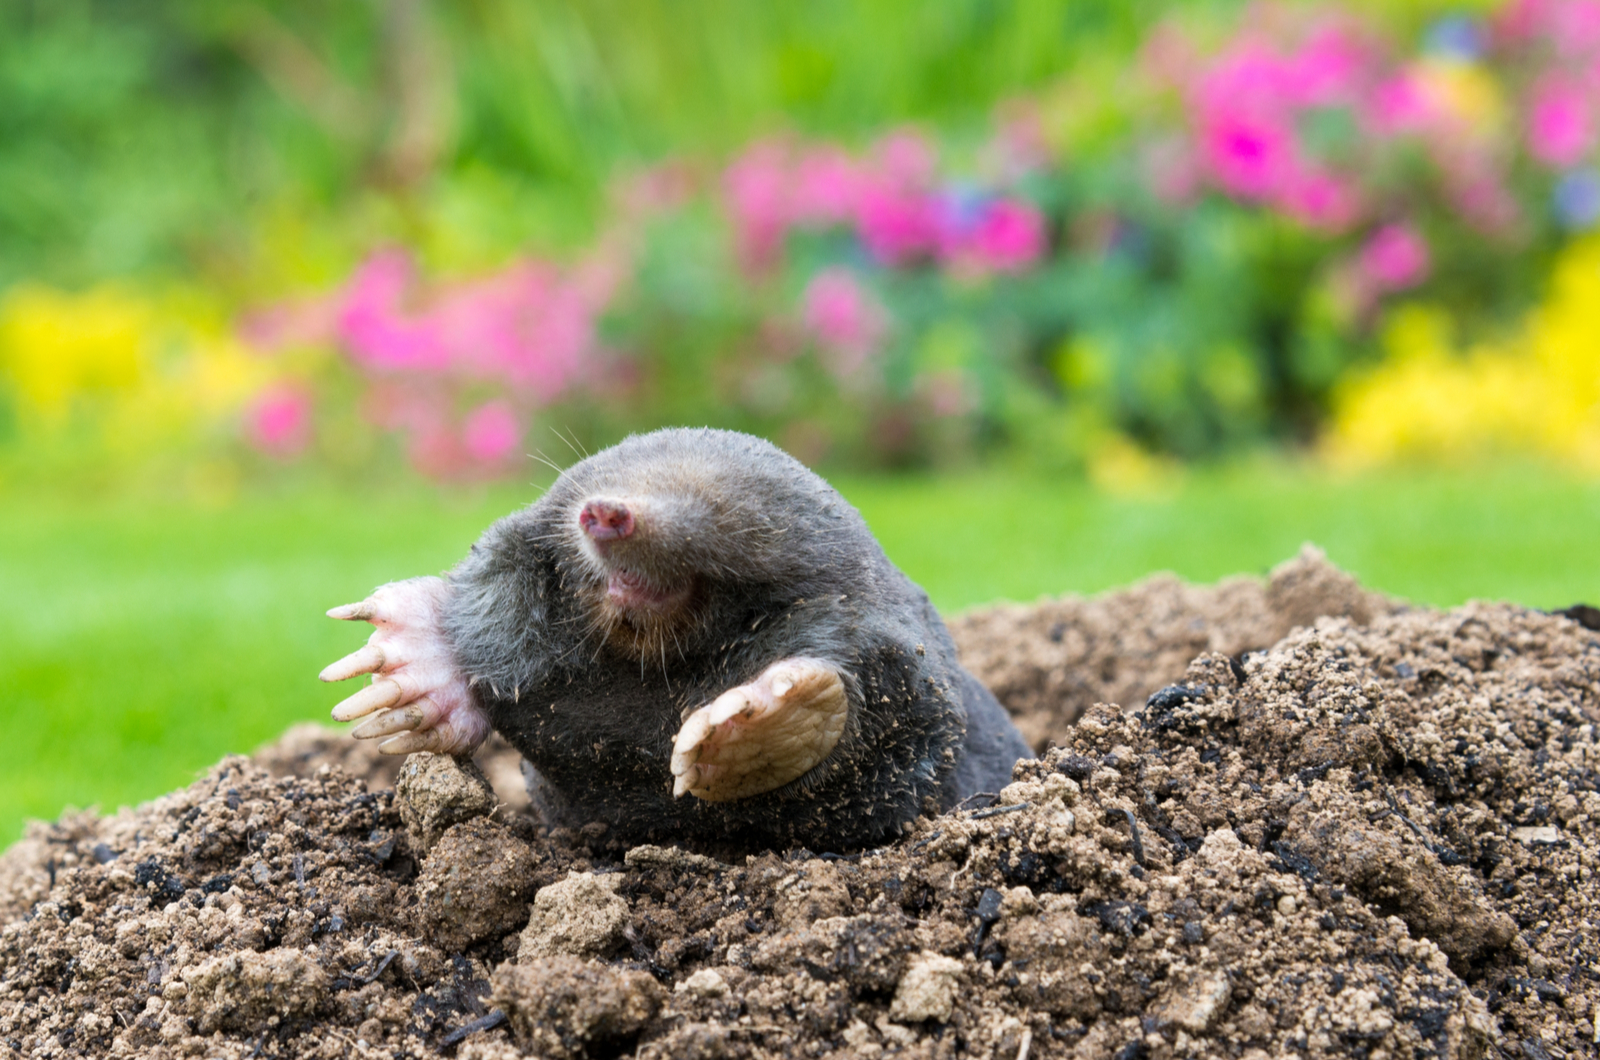 mole crawling out of molehill above ground